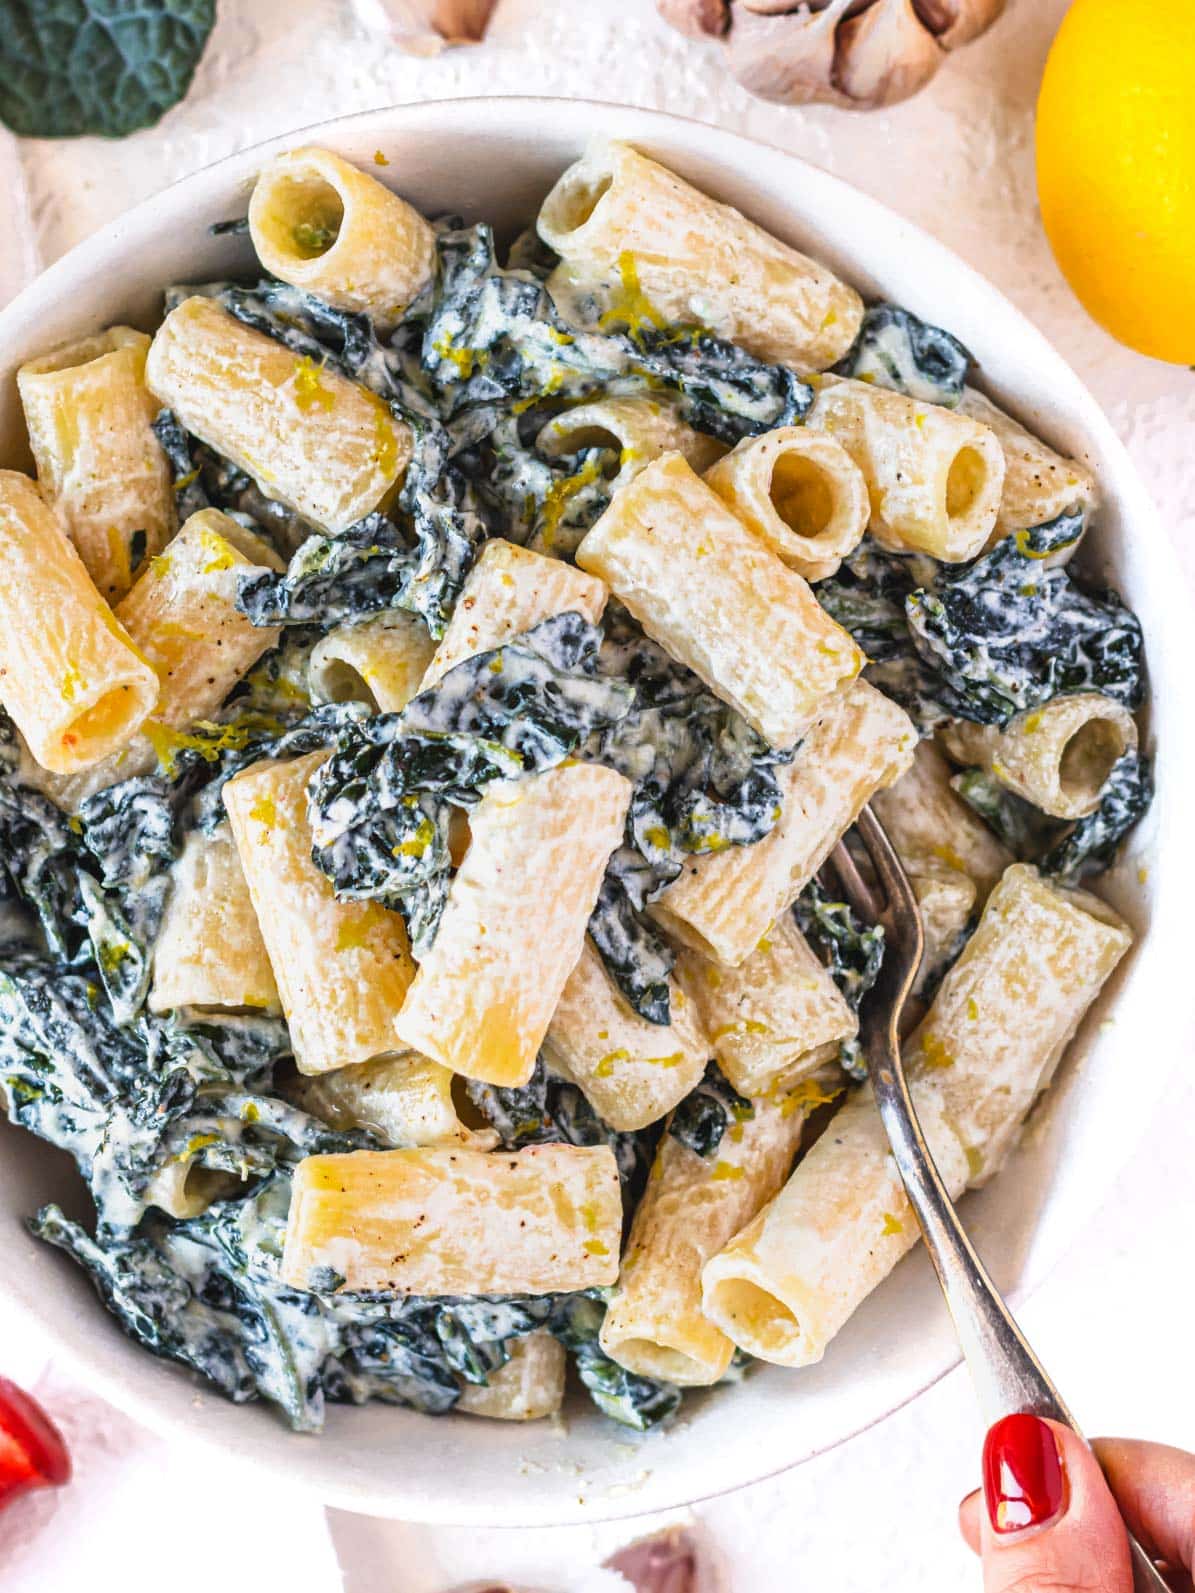 Kale pasta in a bowl with hand and a red nail